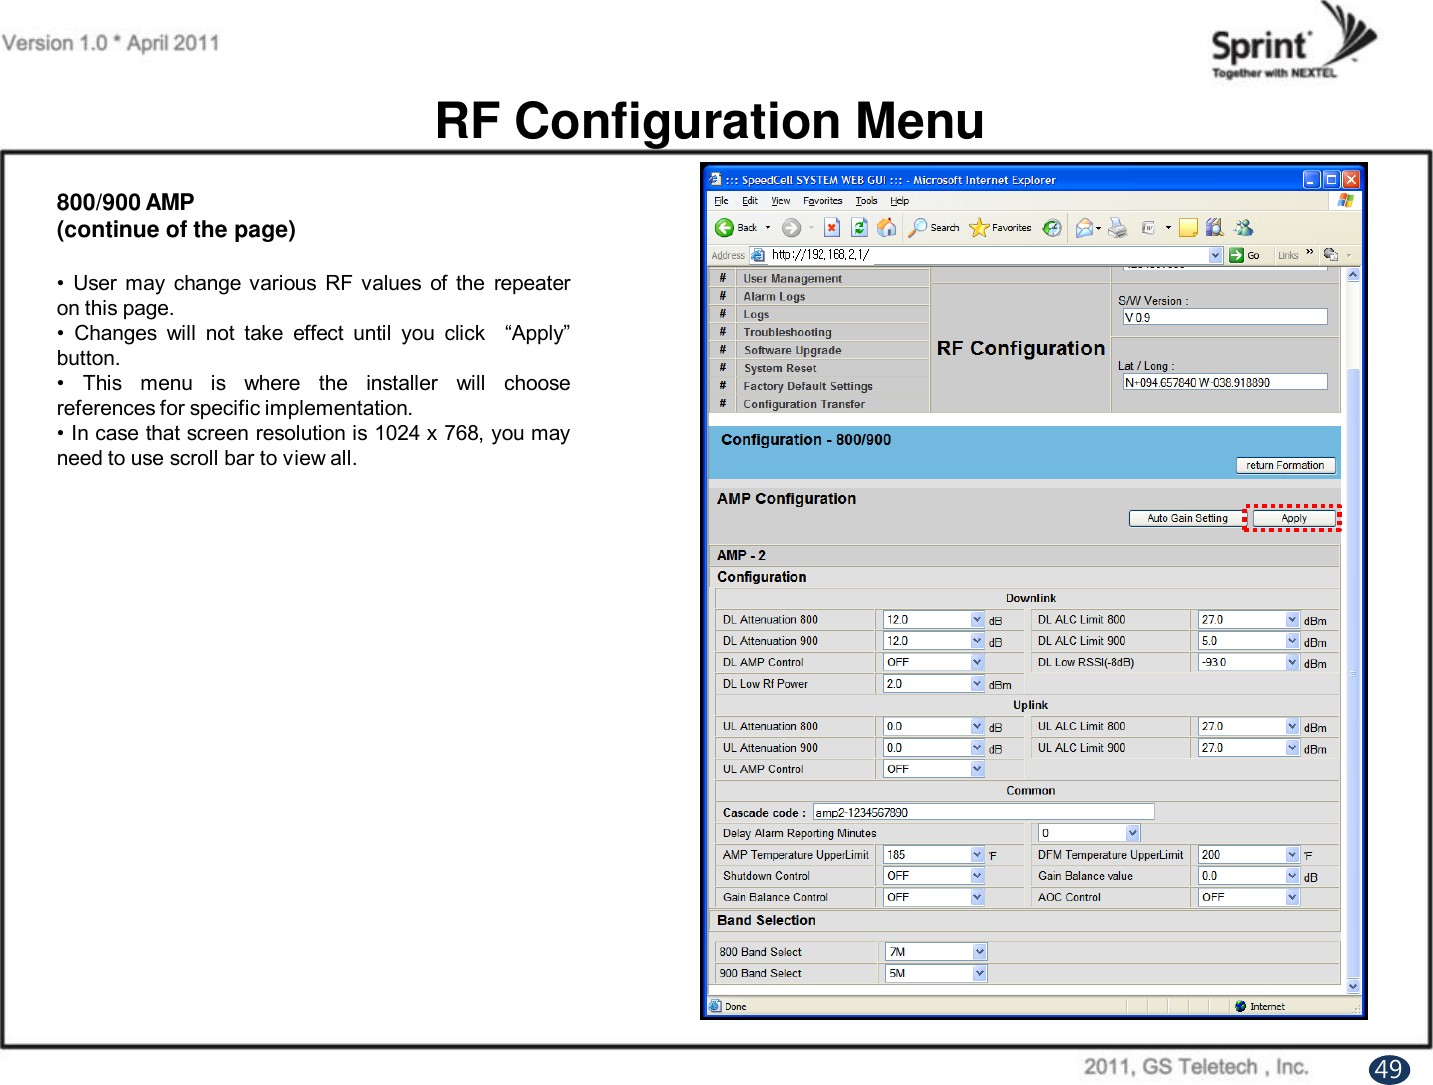 RF Configuration Menu800/900 AMP(continue of the page)• User may change various RF values of the repeateron this page.•Changes will not take effect until you click “Apply”button.• This menu is where the installer will choosereferences for specific implementation.•In case that screen resolution is 1024 x768, you mayneed to use scroll bar to view all.49